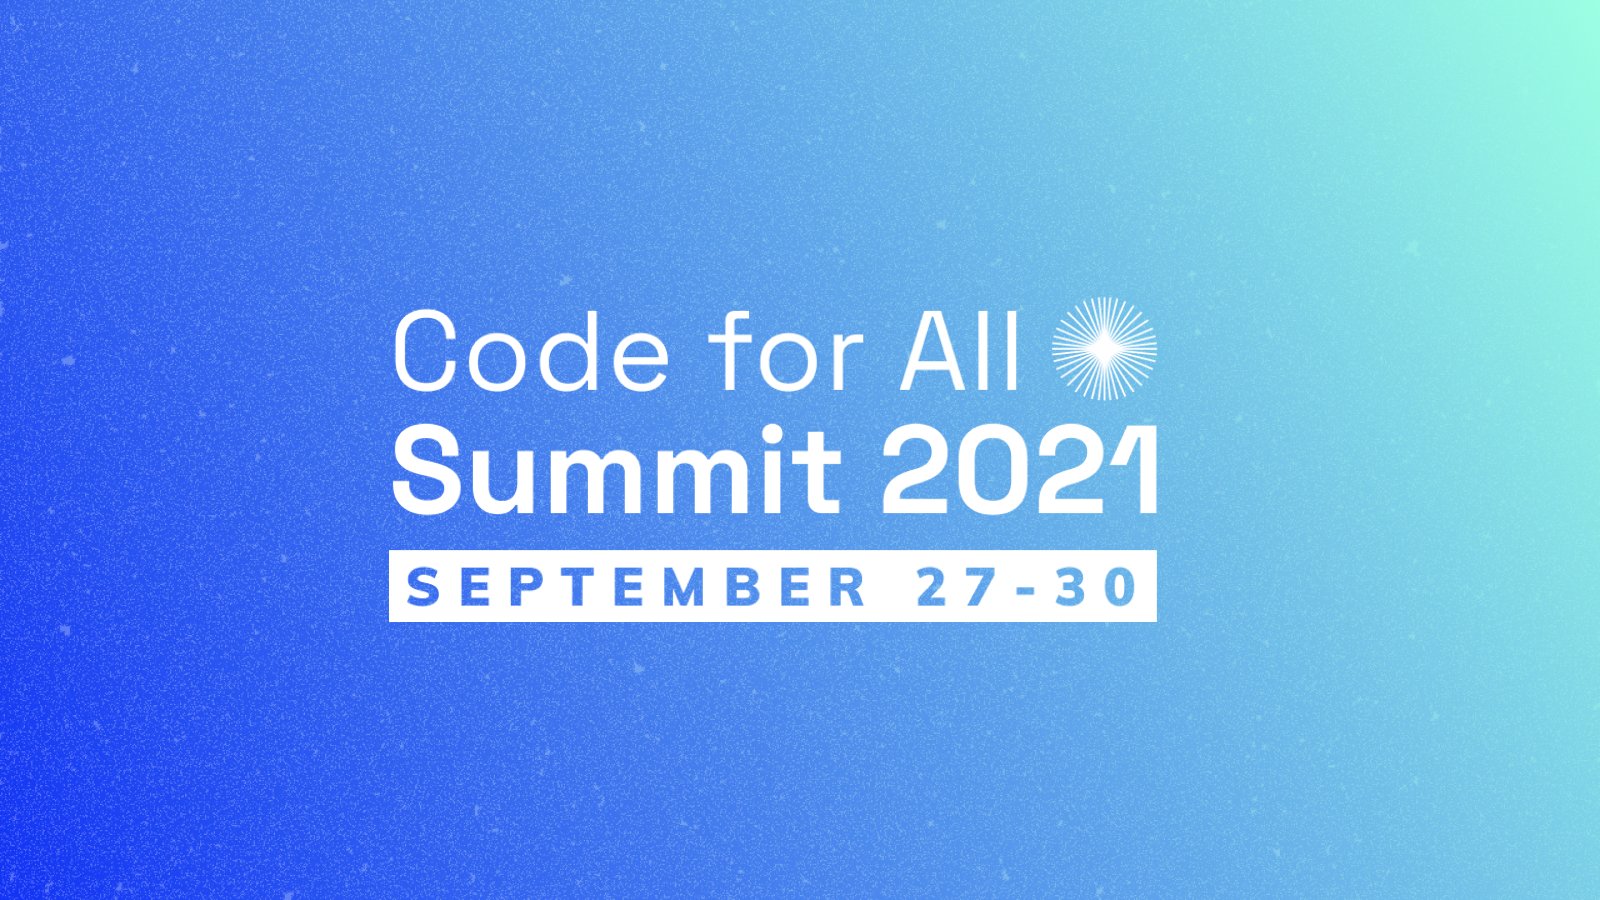 Image text: Code for All Summit 2021. September 27 - 30.